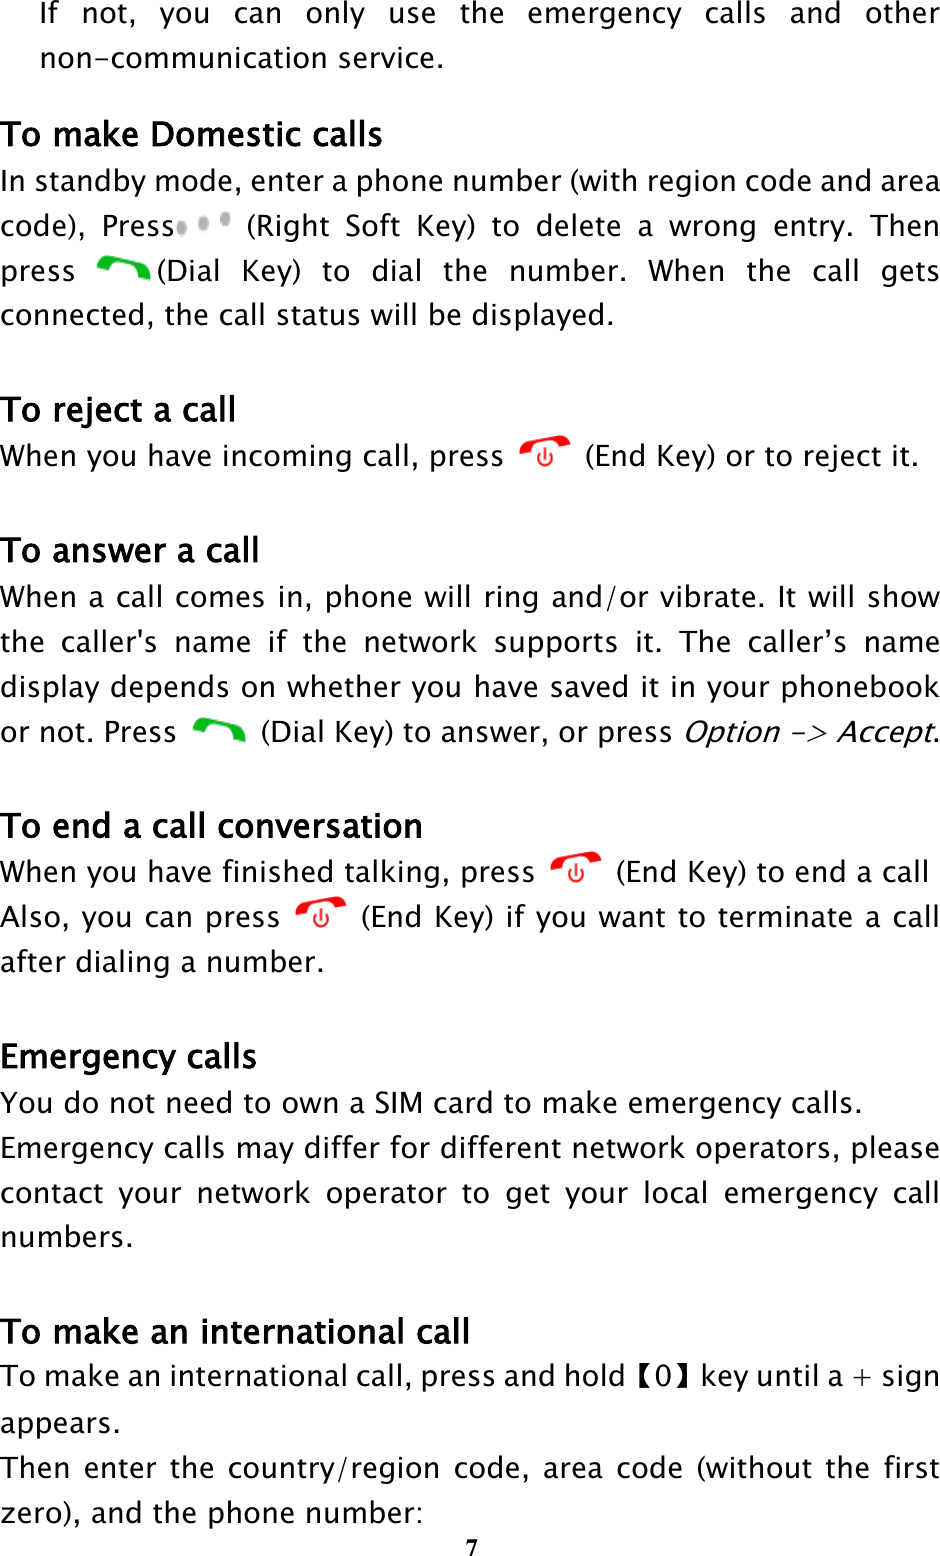  7 If  not,  you  can  only  use  the  emergency  calls  and  other non-communication service. To make Domestic calls In standby mode, enter a phone number (with region code and area code),  Press   (Right  Soft  Key)  to  delete  a  wrong  entry.  Then press  (Dial  Key)  to  dial  the  number.  When  the  call  gets connected, the call status will be displayed.    To reject a call When you have incoming call, press    (End Key) or to reject it.  To answer a call When a call comes in, phone will ring and/or vibrate. It will show the  caller&apos;s  name  if  the  network  supports  it.  The  caller’s  name display depends on whether you have saved it in your phonebook or not. Press    (Dial Key) to answer, or press Option -&gt; Accept.  To end a call conversation When you have finished talking, press    (End Key) to end a call Also, you can press    (End Key) if you want to terminate a call after dialing a number.  Emergency calls You do not need to own a SIM card to make emergency calls. Emergency calls may differ for different network operators, please contact  your  network  operator  to  get  your  local  emergency  call numbers.  To make an international call To make an international call, press and hold【0】key until a + sign appears. Then enter the country/region code, area code  (without the  first zero), and the phone number: 